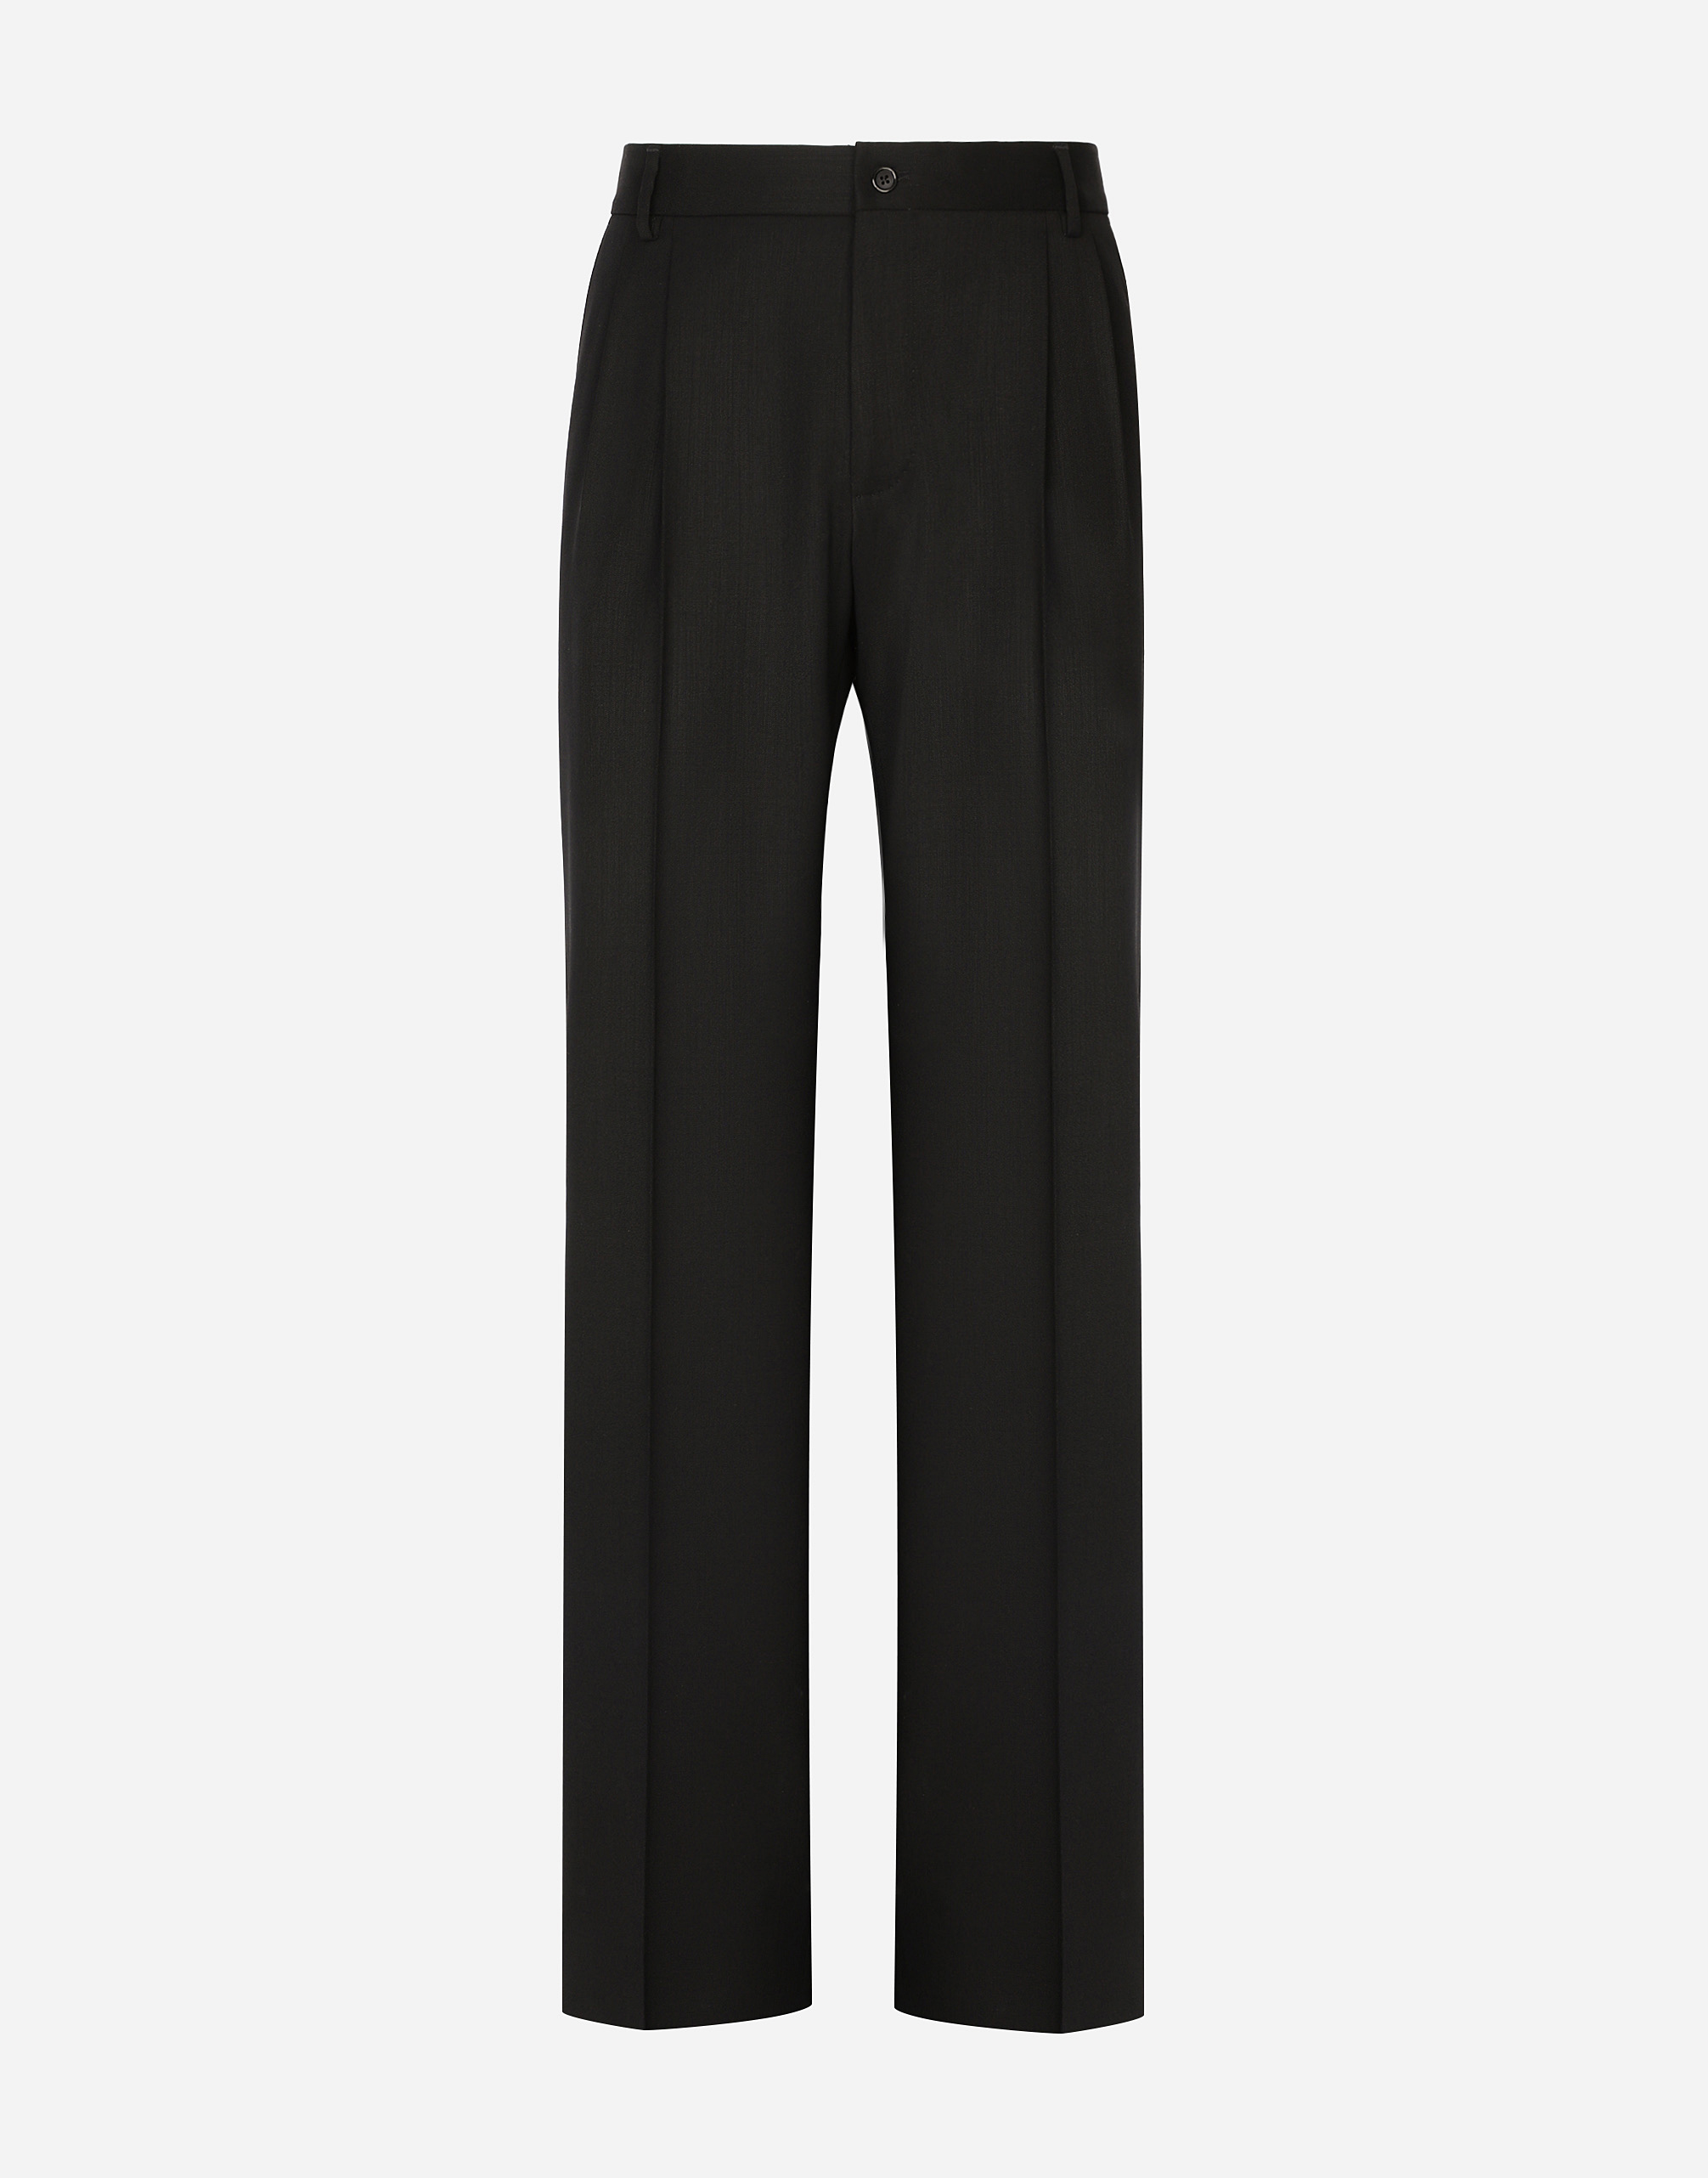 Stretch virgin wool pants with straight leg in Black